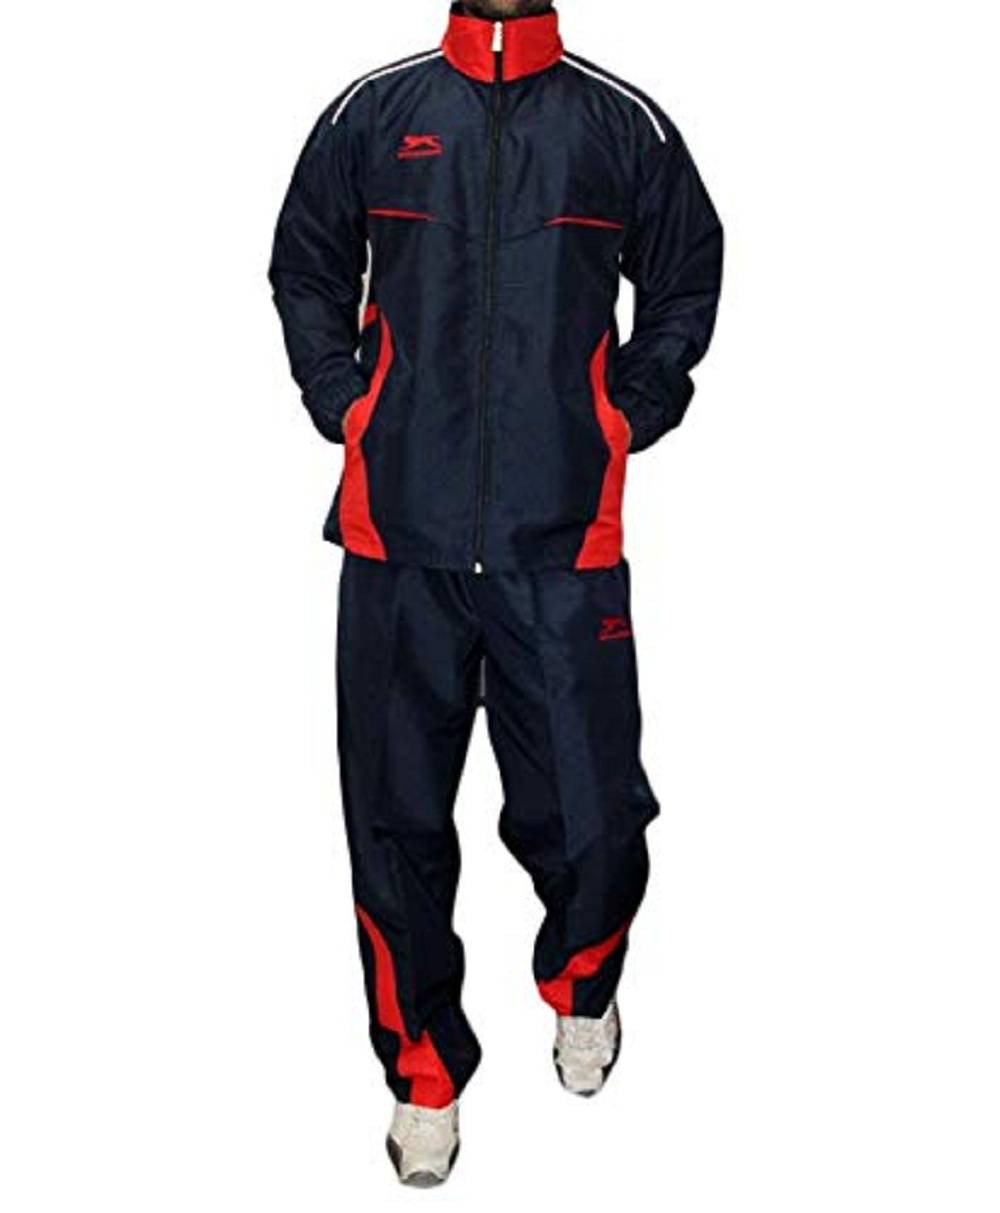 Shiv Naresh Track Suit China Manufacturers & Suppliers & Factory